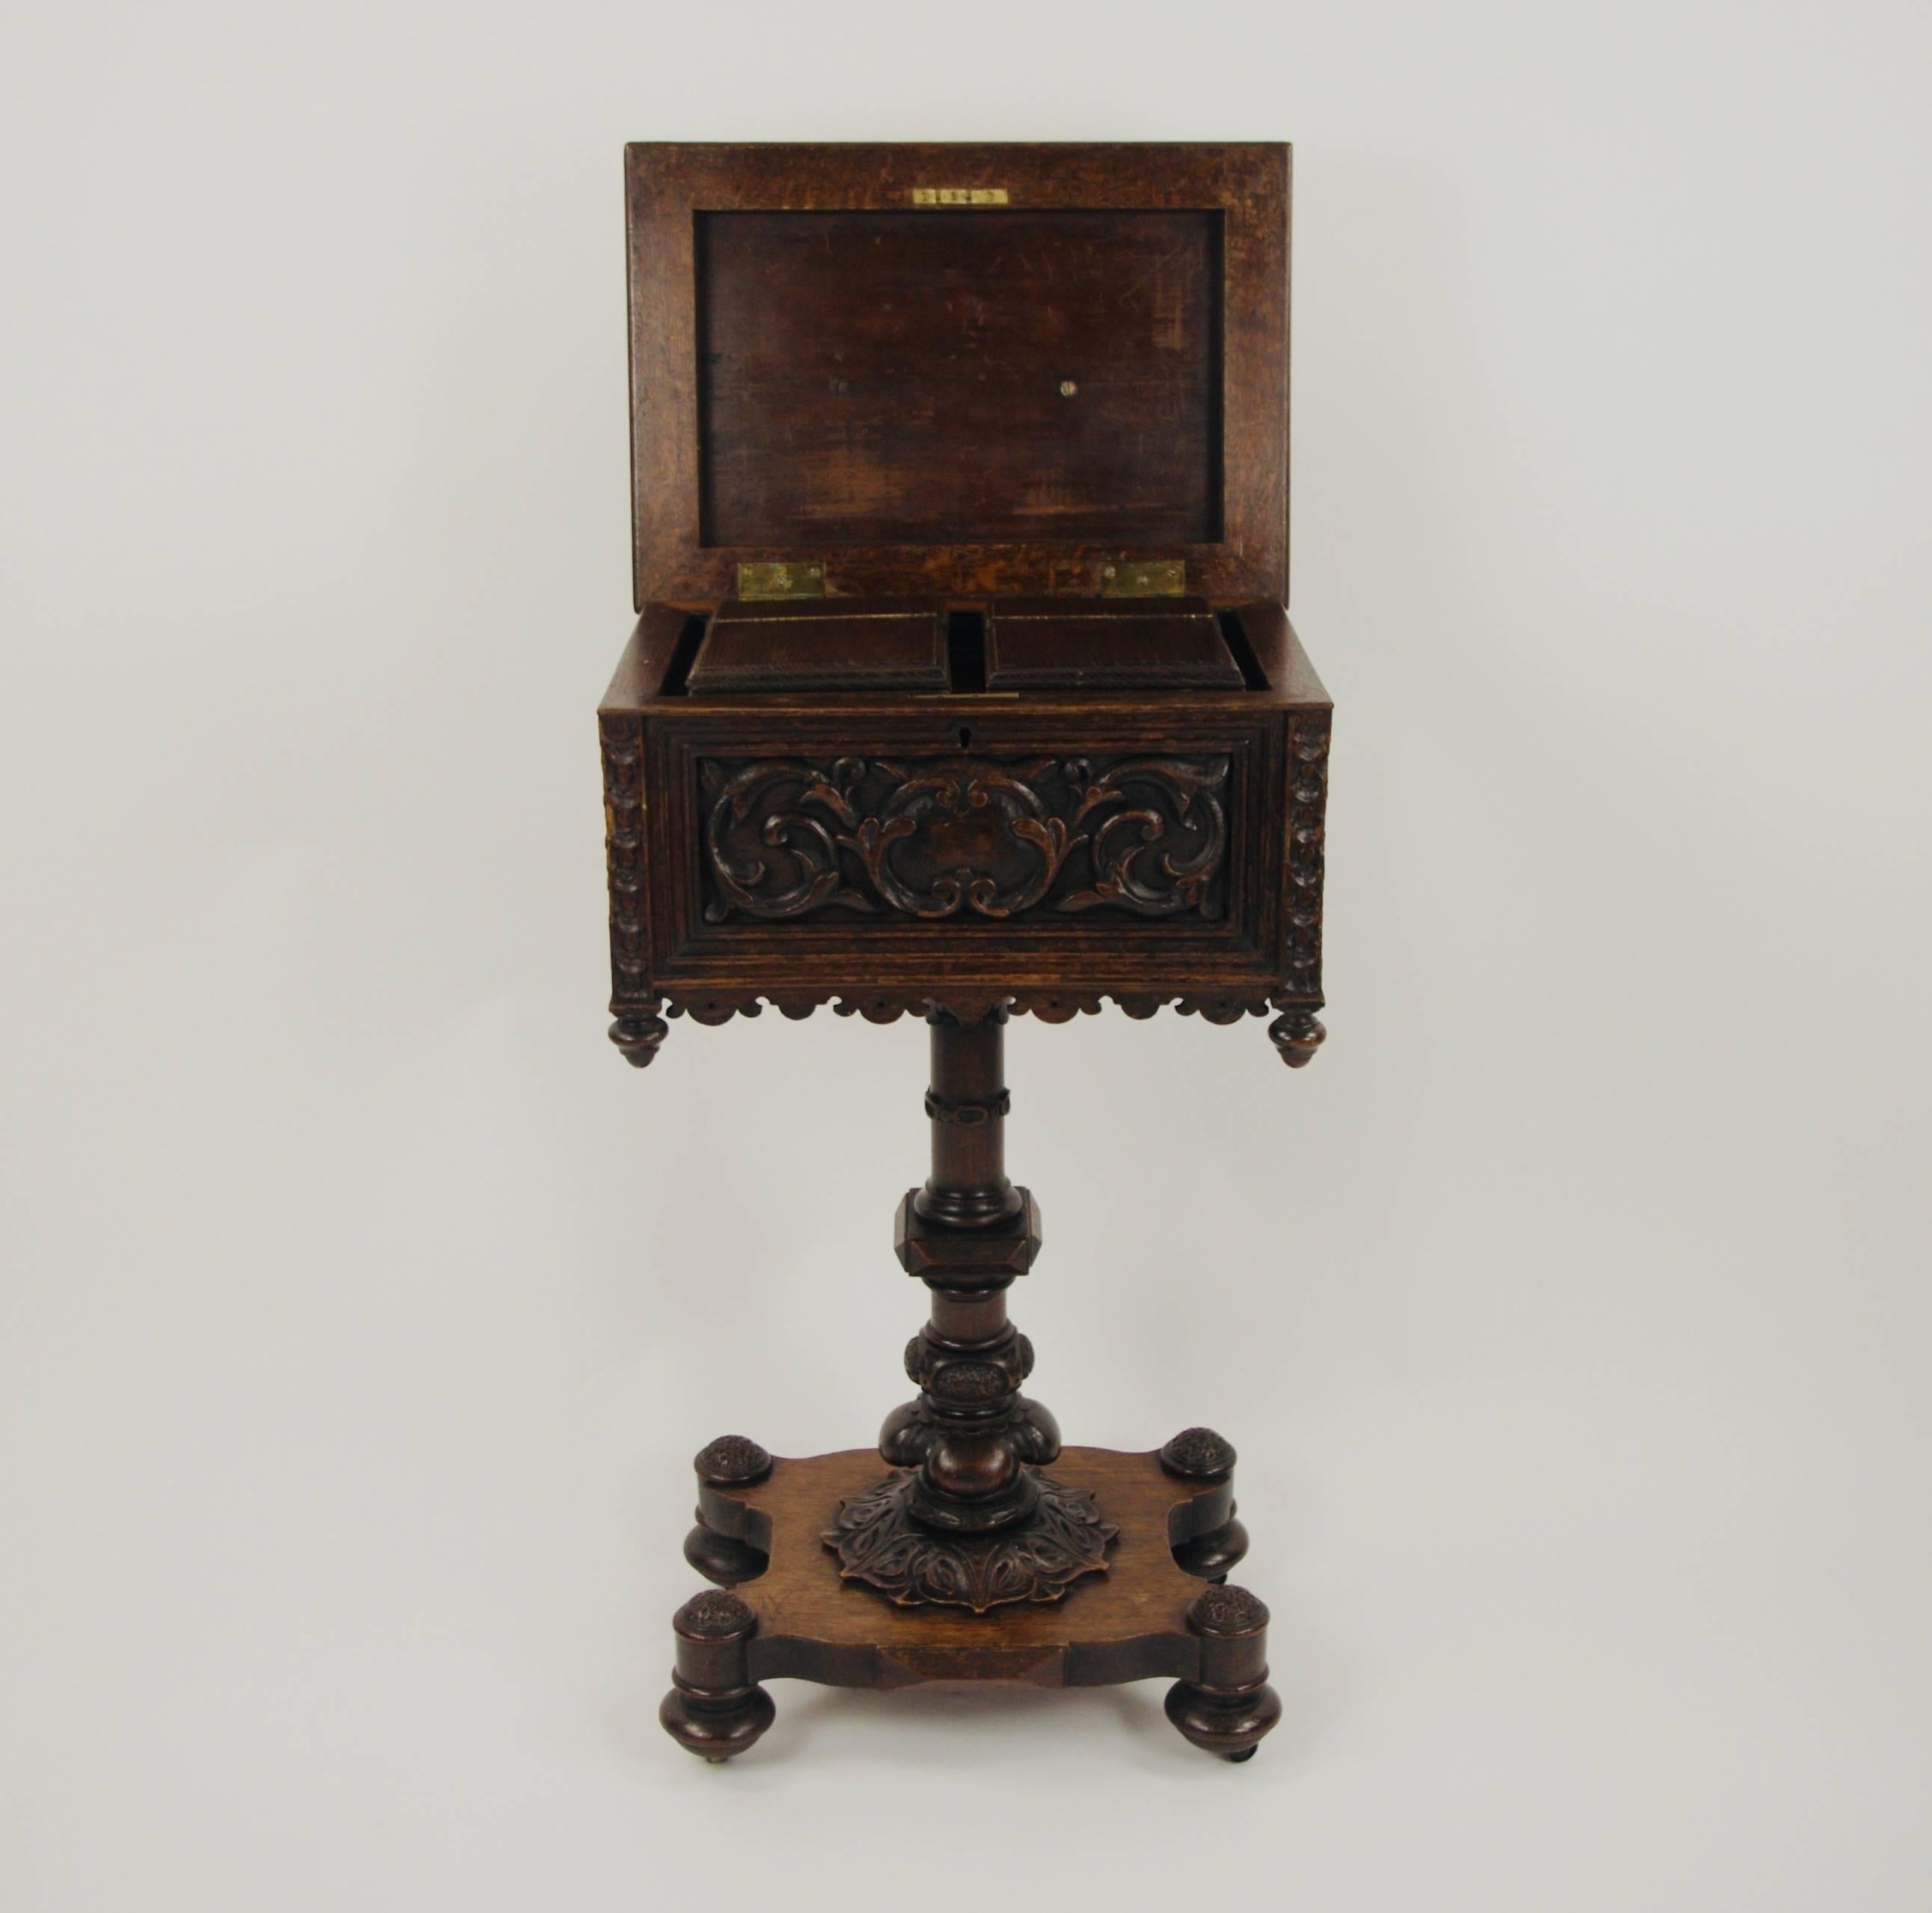 A late 19th century Flemish oak teapoy, carved all over with Renaissance style decoration. Turned column with quadripartite base.

This item is on view in Berkshire - UK.